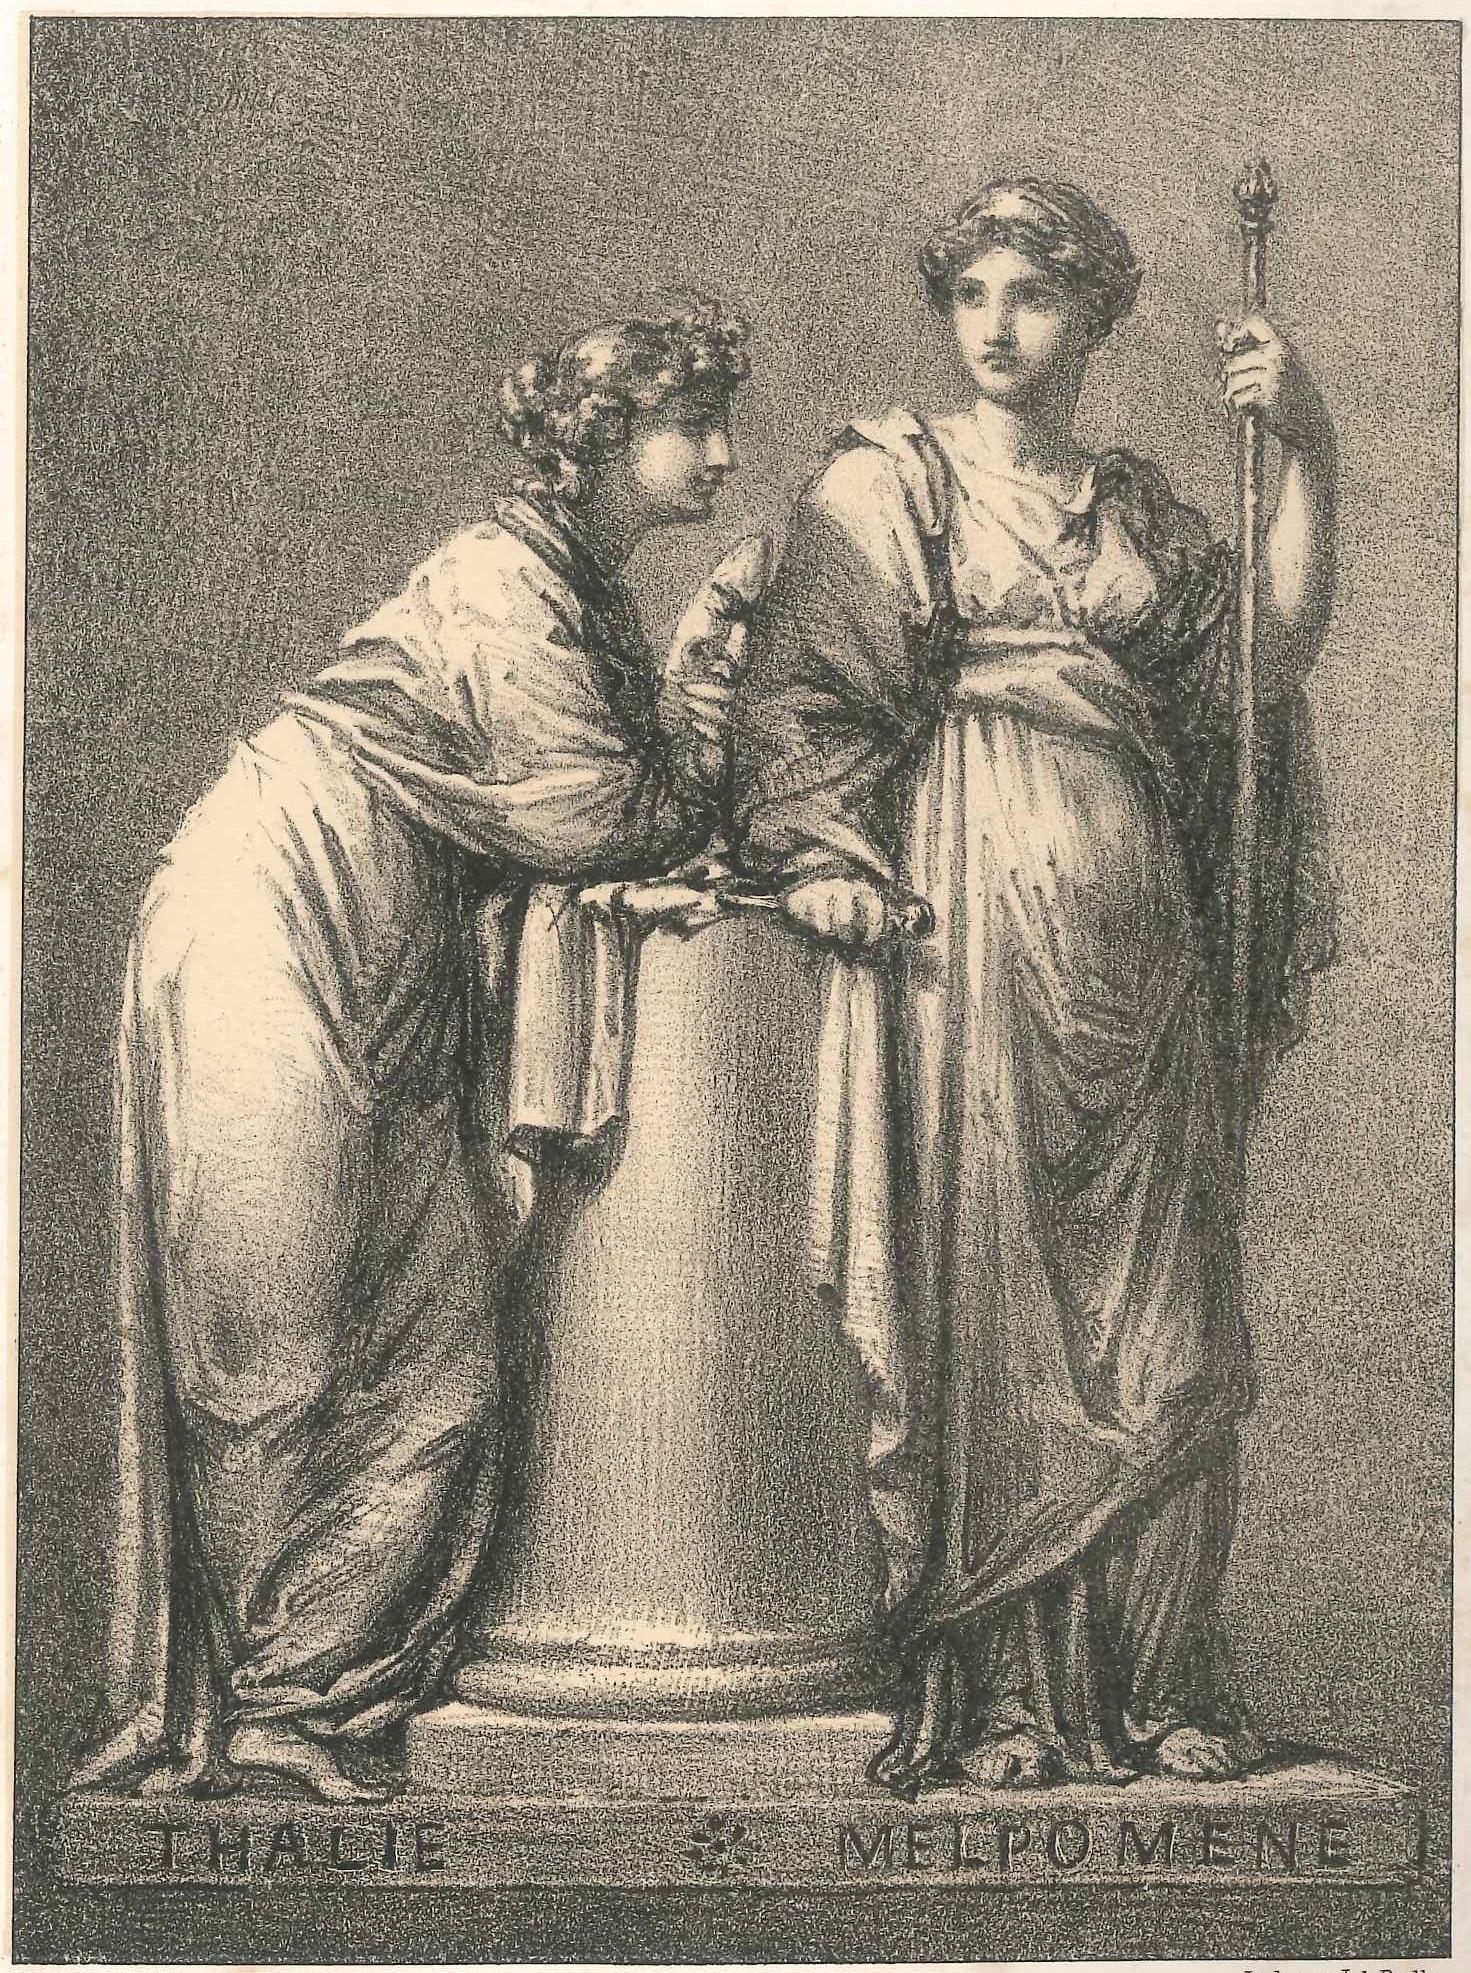 Apollon et les Muses - Lithograph after Prud'hon by J. Boilly - Print by Julien Boilly